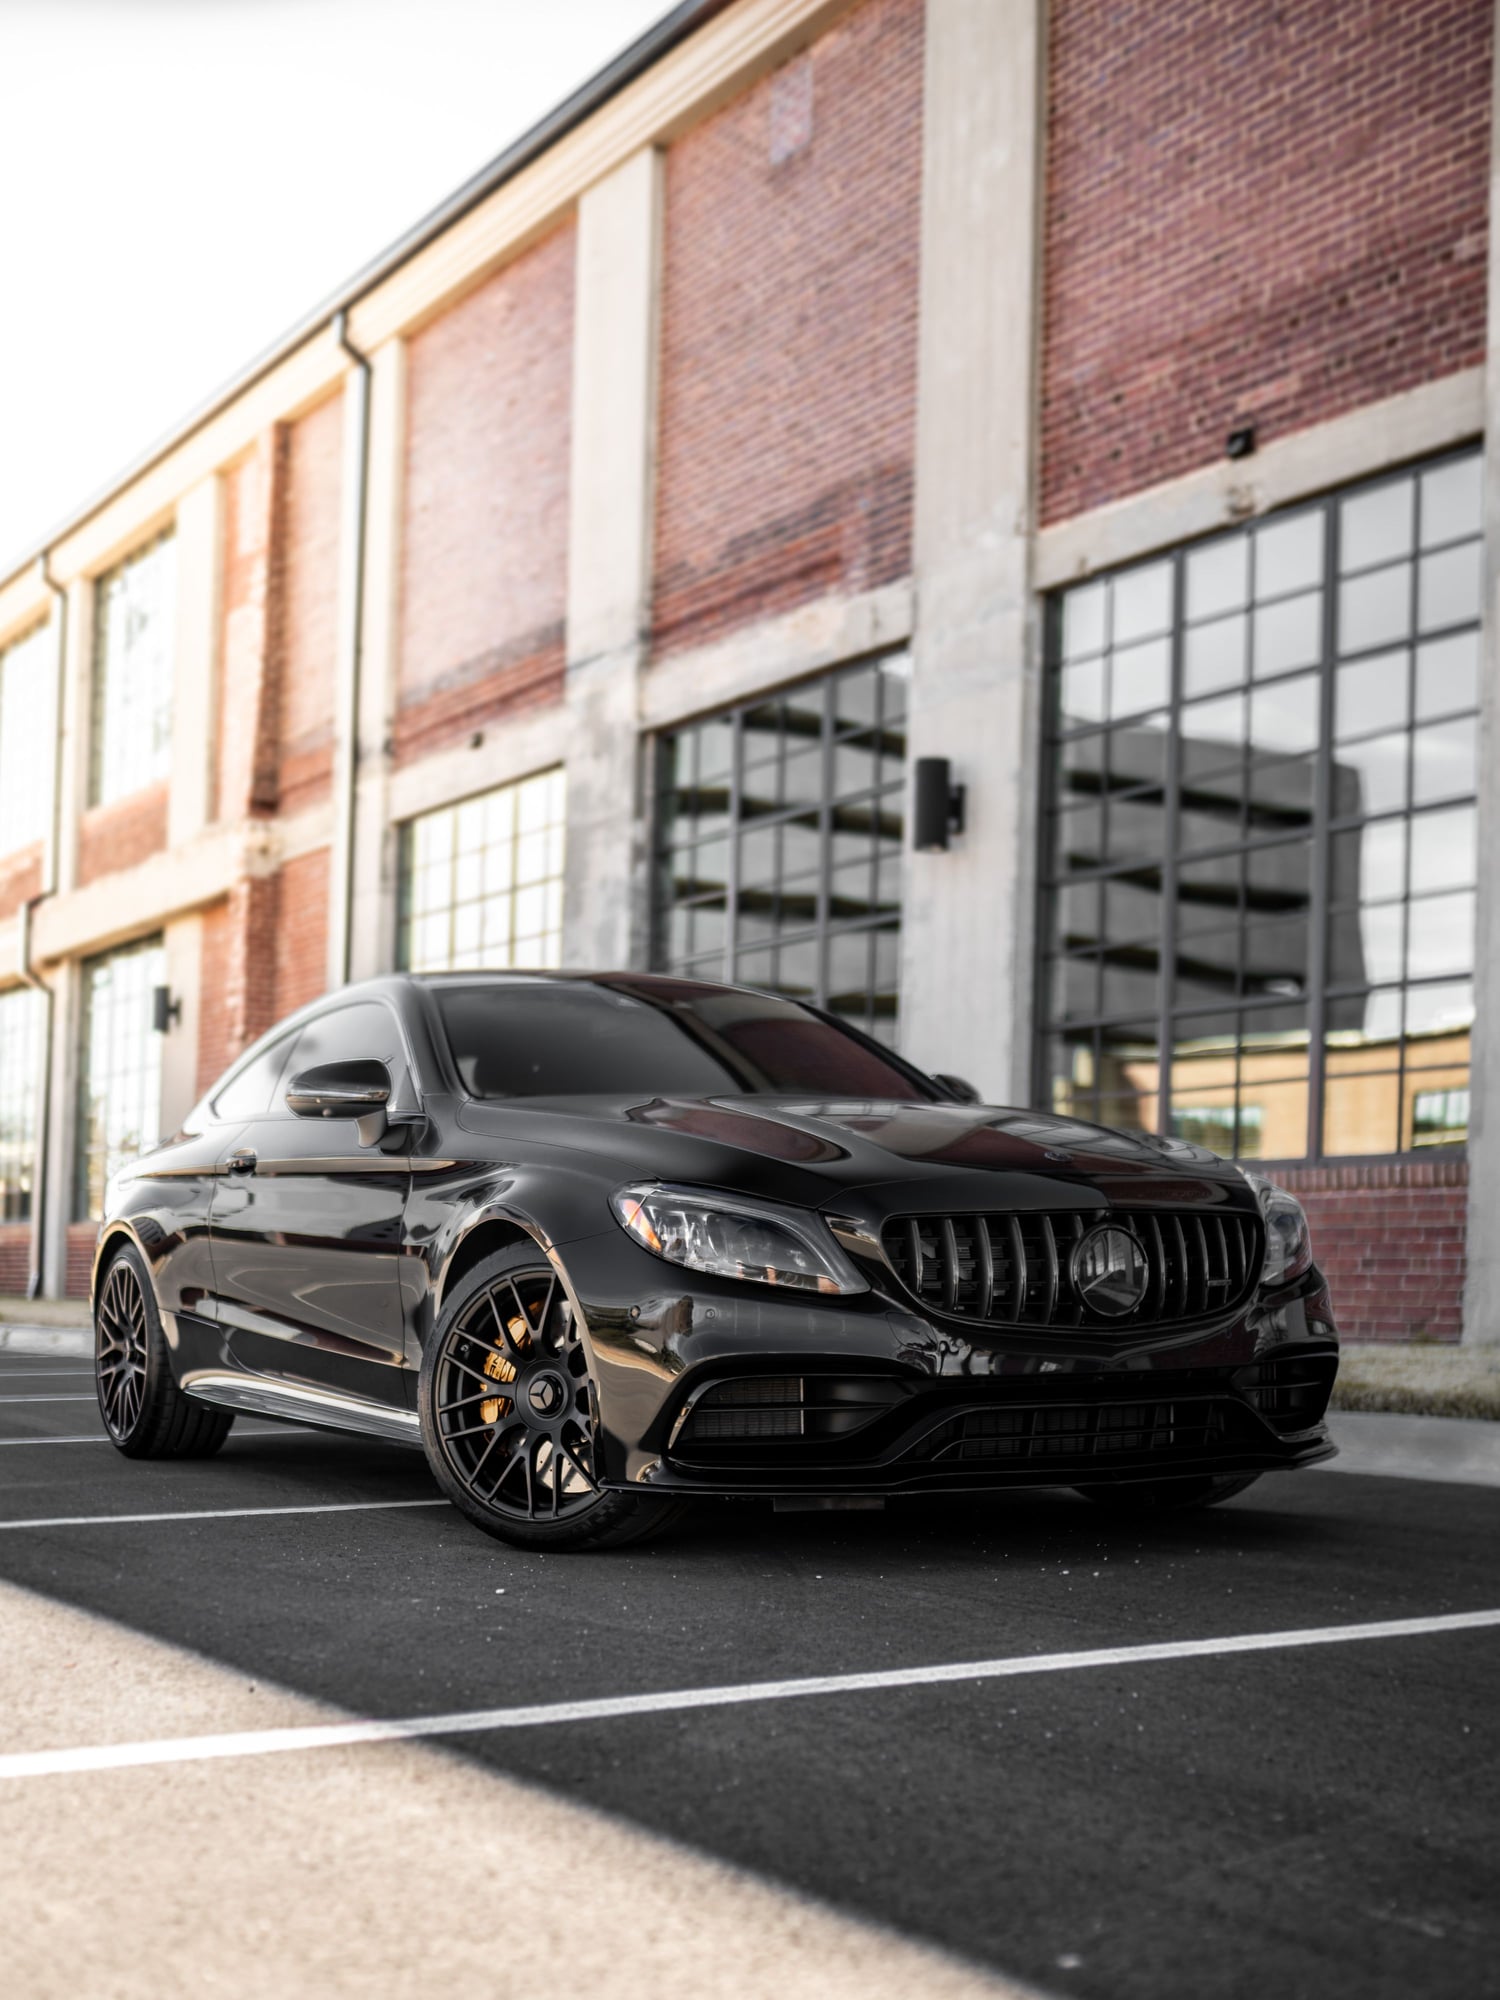 Wheels and Tires/Axles - C63 AMGS Front 255/35/19 & Rear 285/30/20 Michelin Pilot Sport Cup 2 Tires - New - 2017 to 2021 Mercedes-Benz C63 AMG S - Charlotte, NC 28202, United States